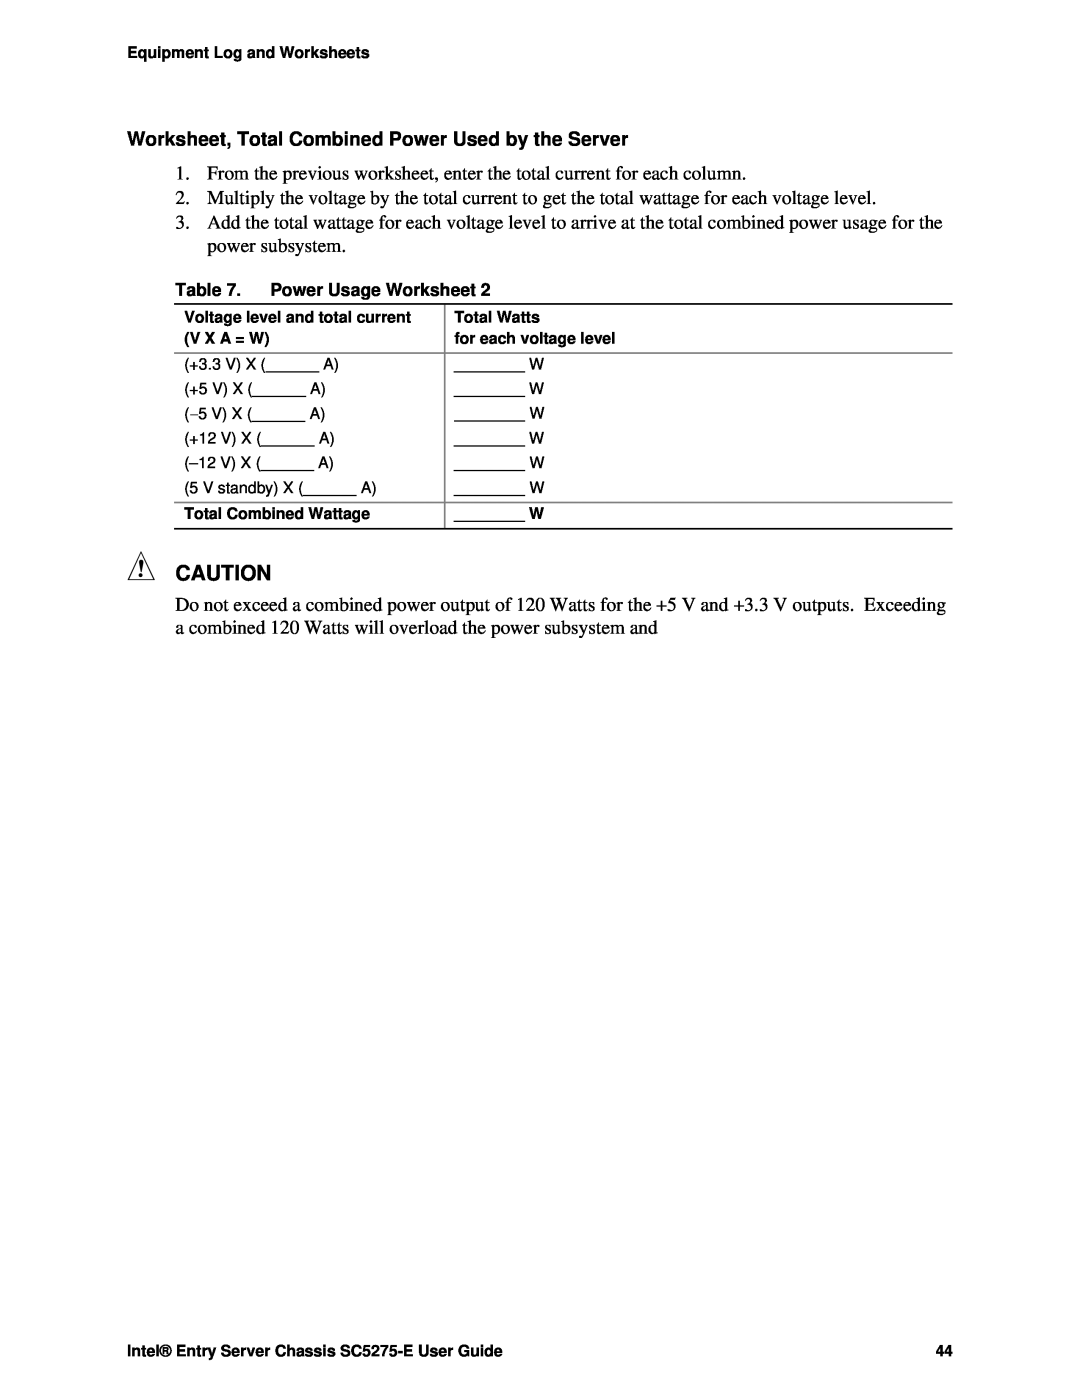 Intel SC5275-E, C50277-001 manual Worksheet, Total Combined Power Used by the Server, Power Usage Worksheet 